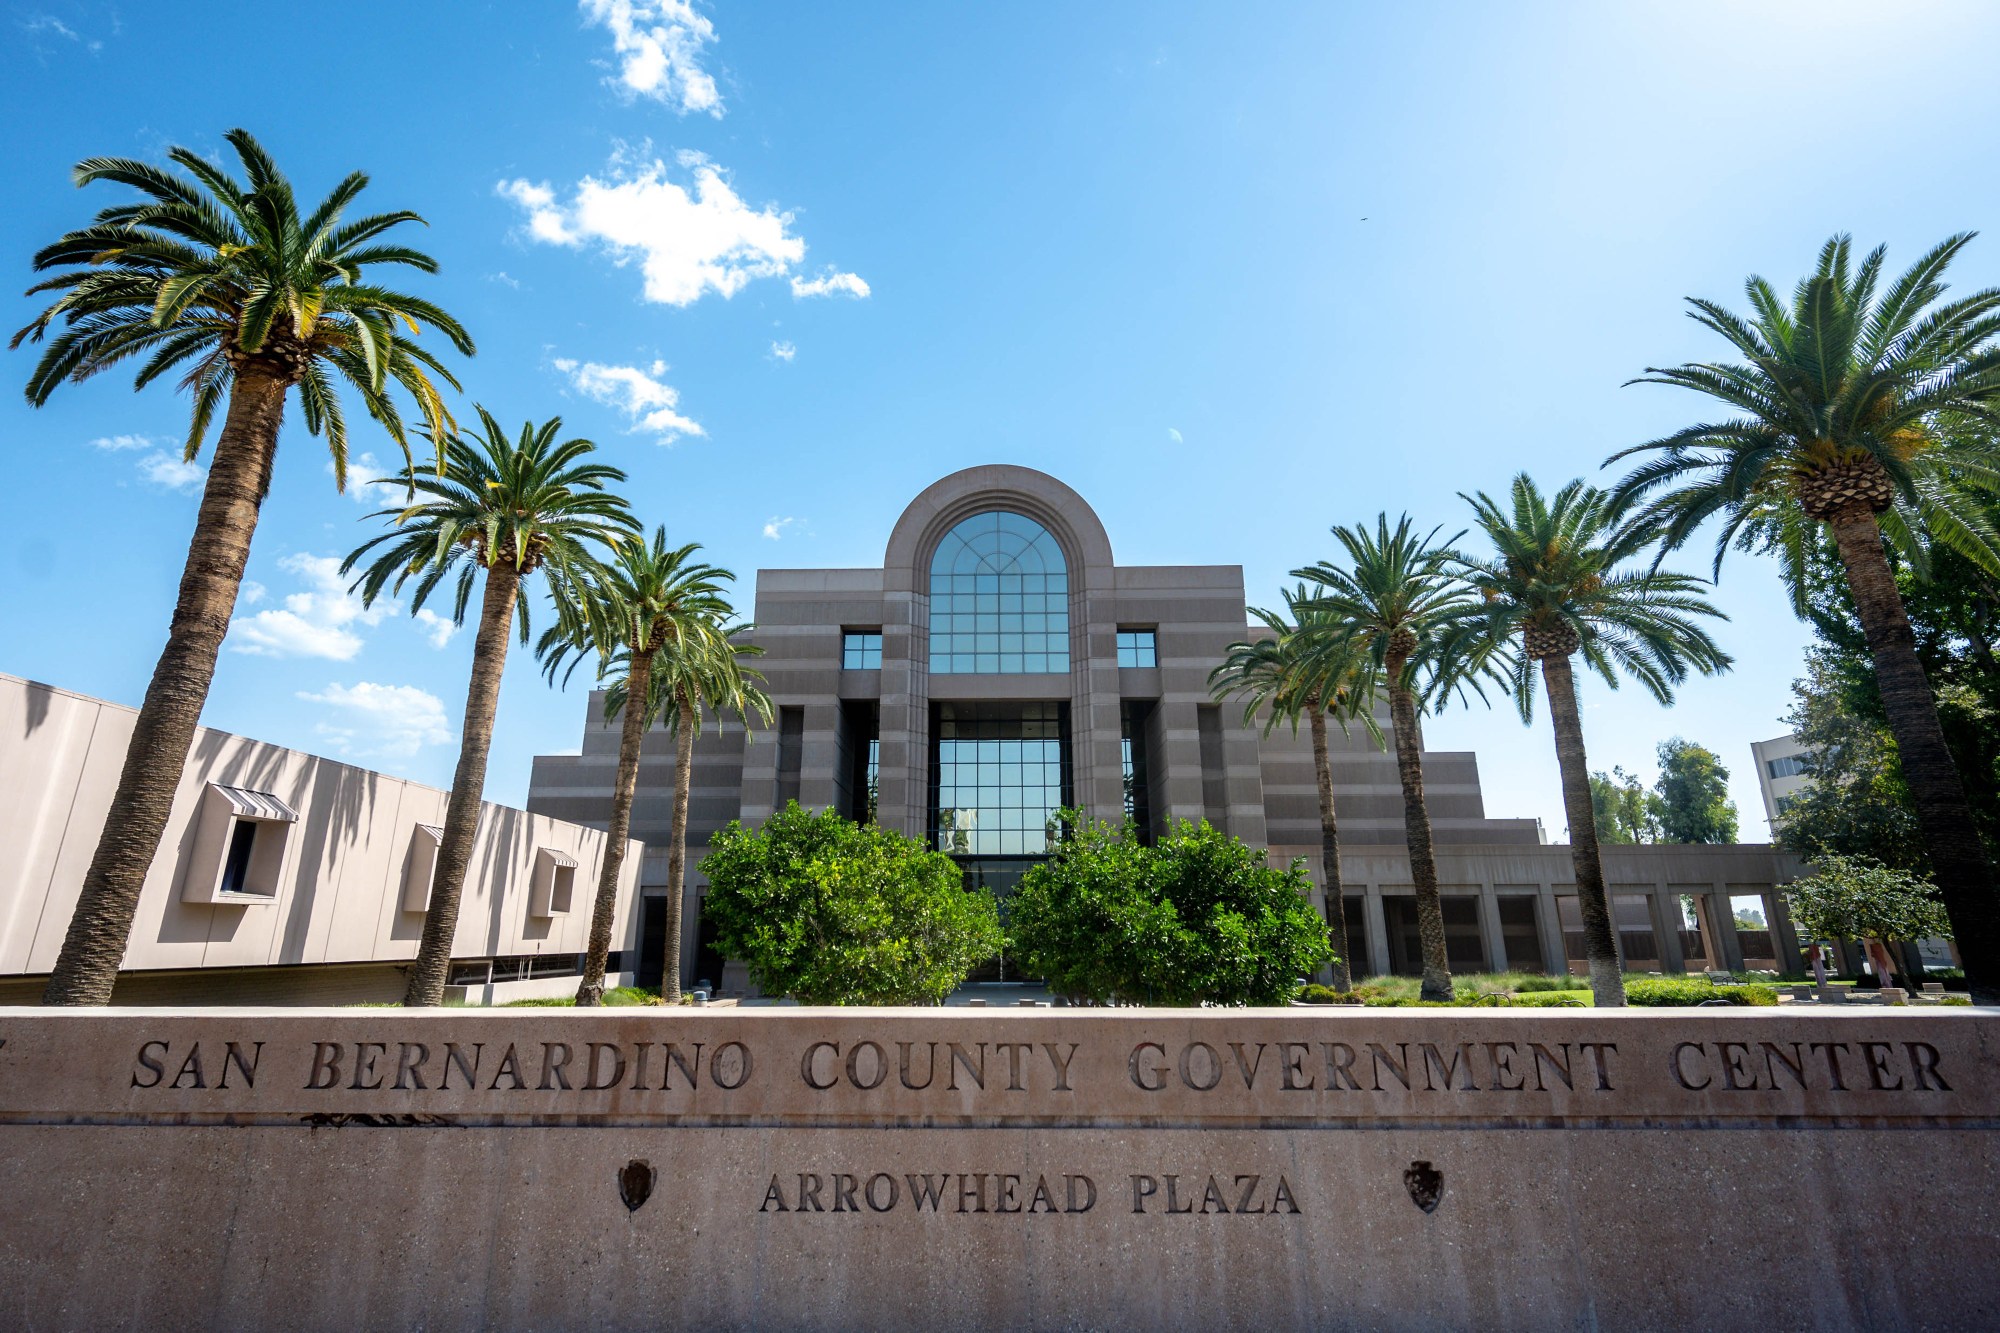 The San Bernardino County Government Center stands against a blue sky in downtown San Bernardino on Friday, Oct. 7, 2022. (File photo by Watchara Phomicinda, The Press-Enterprise/SCNG)